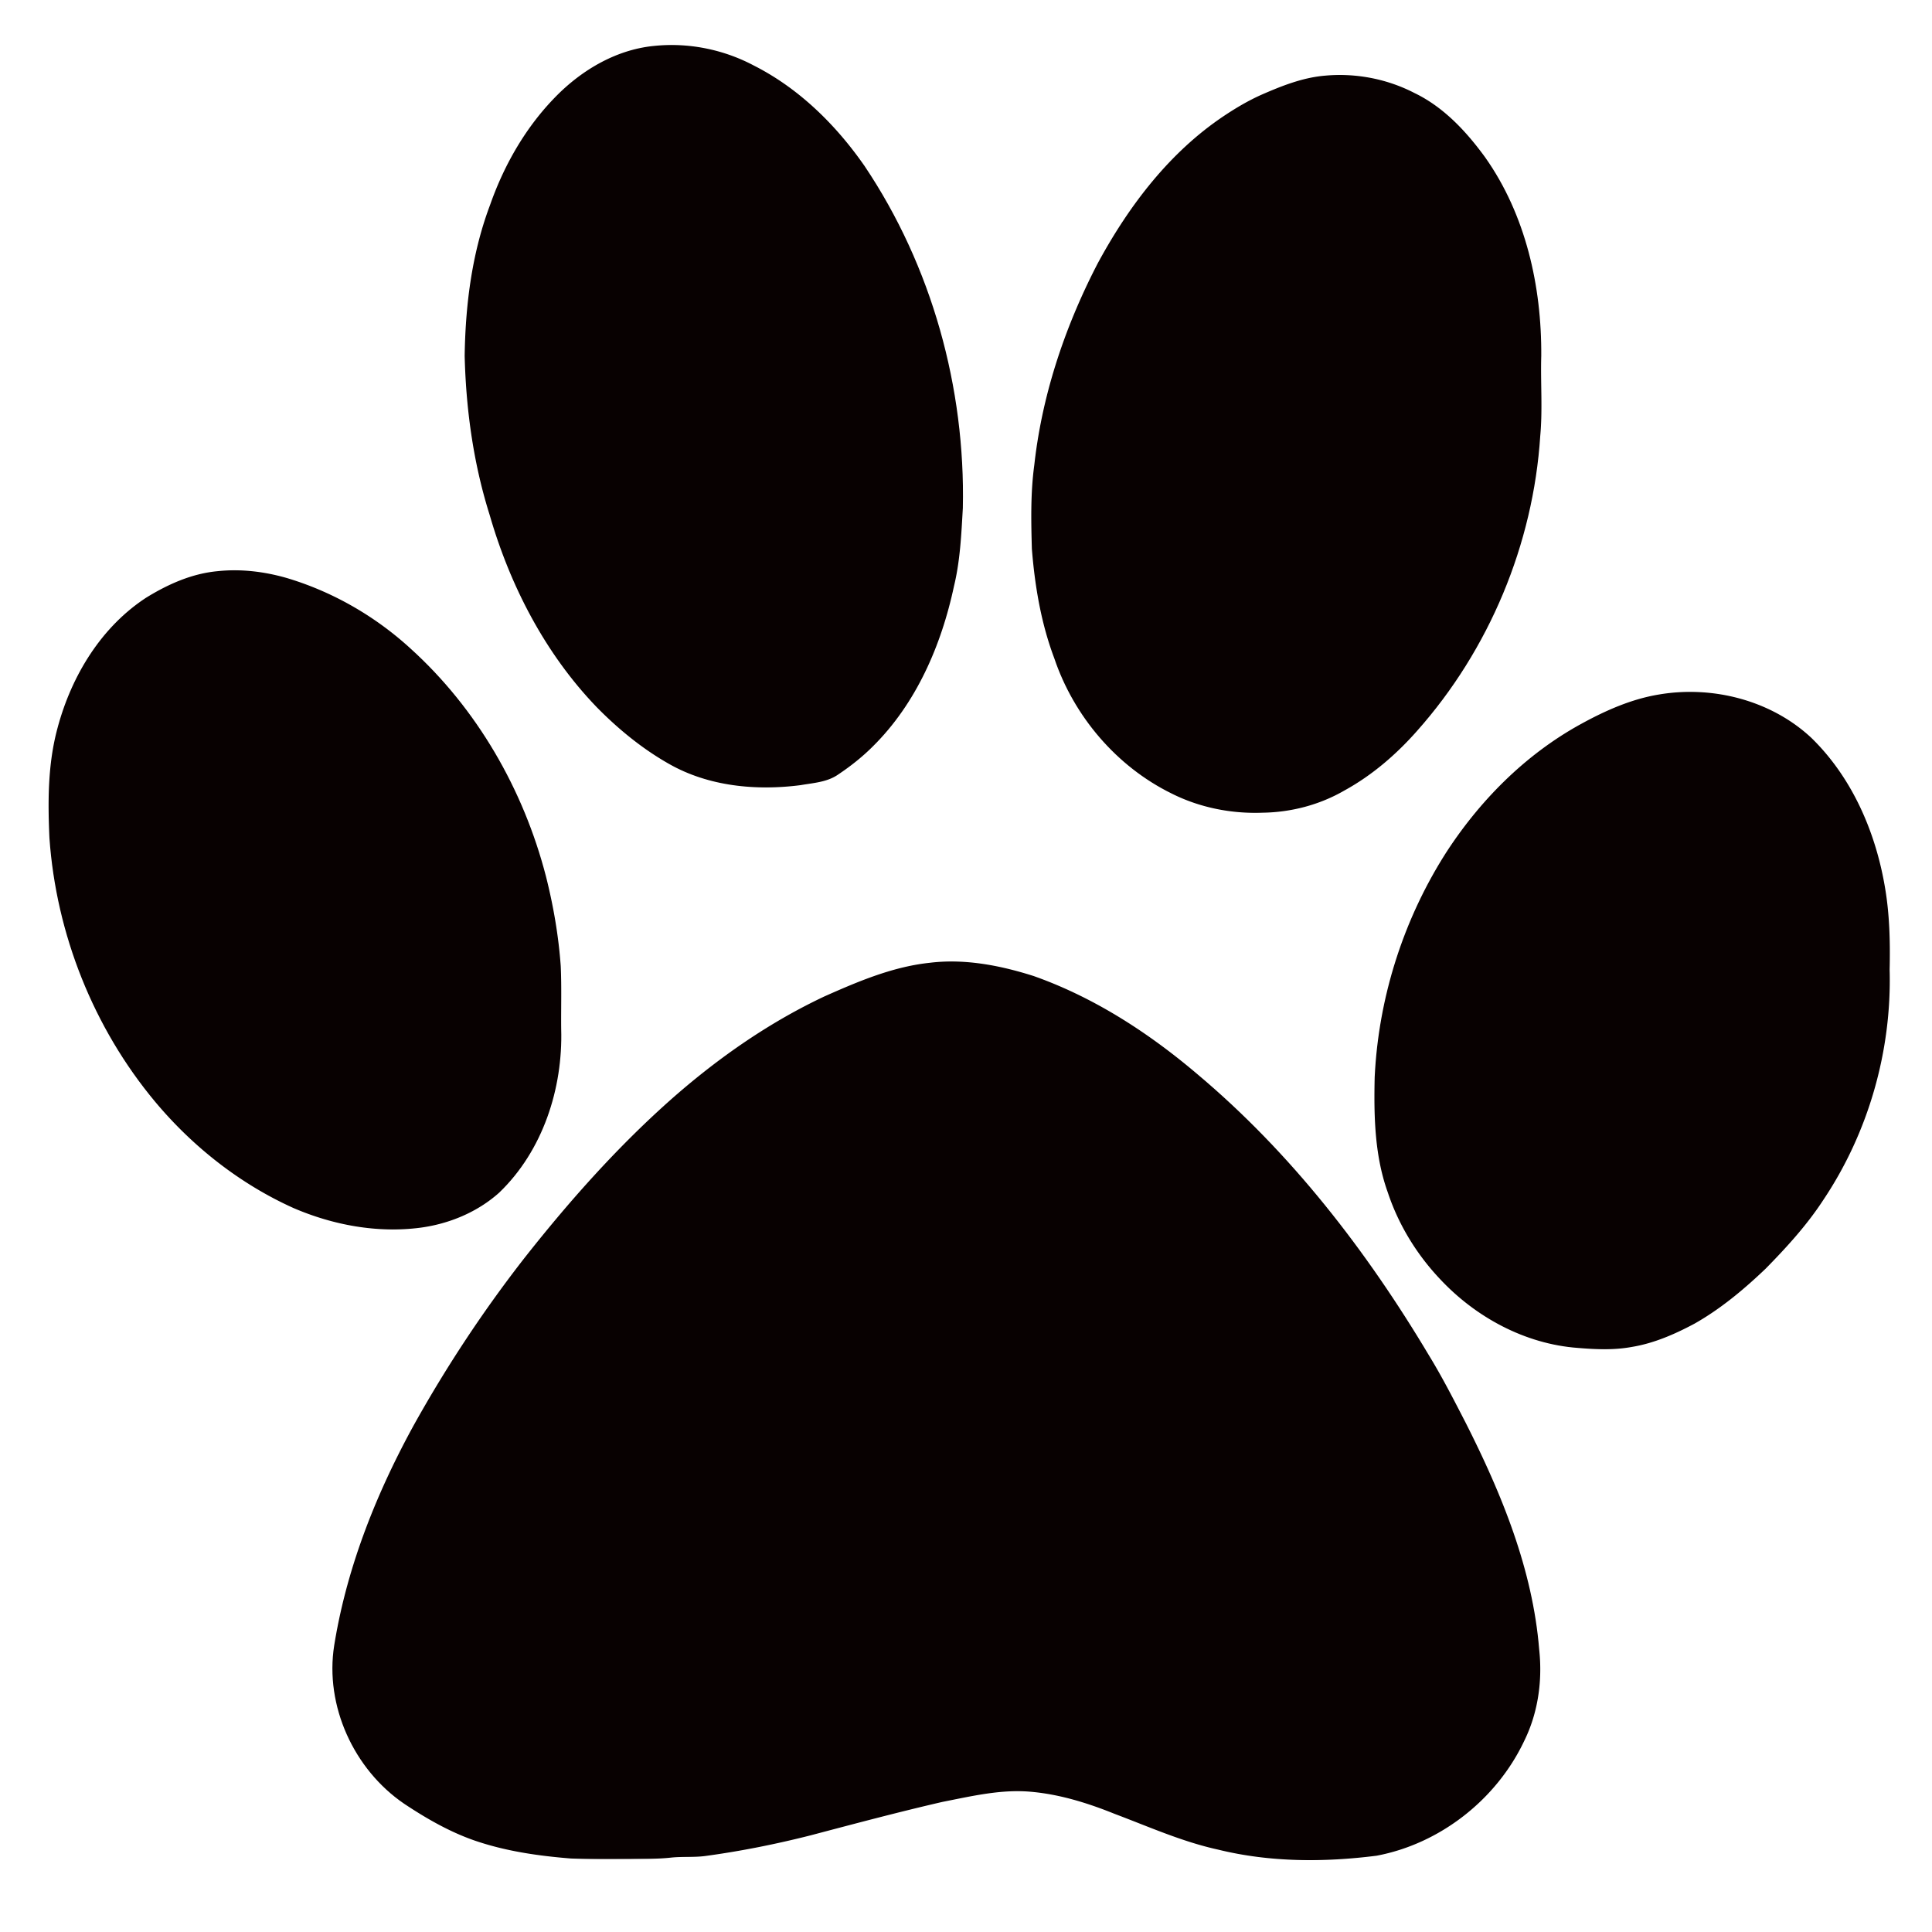 Cougar Paw Print Clip Art - Clipart library